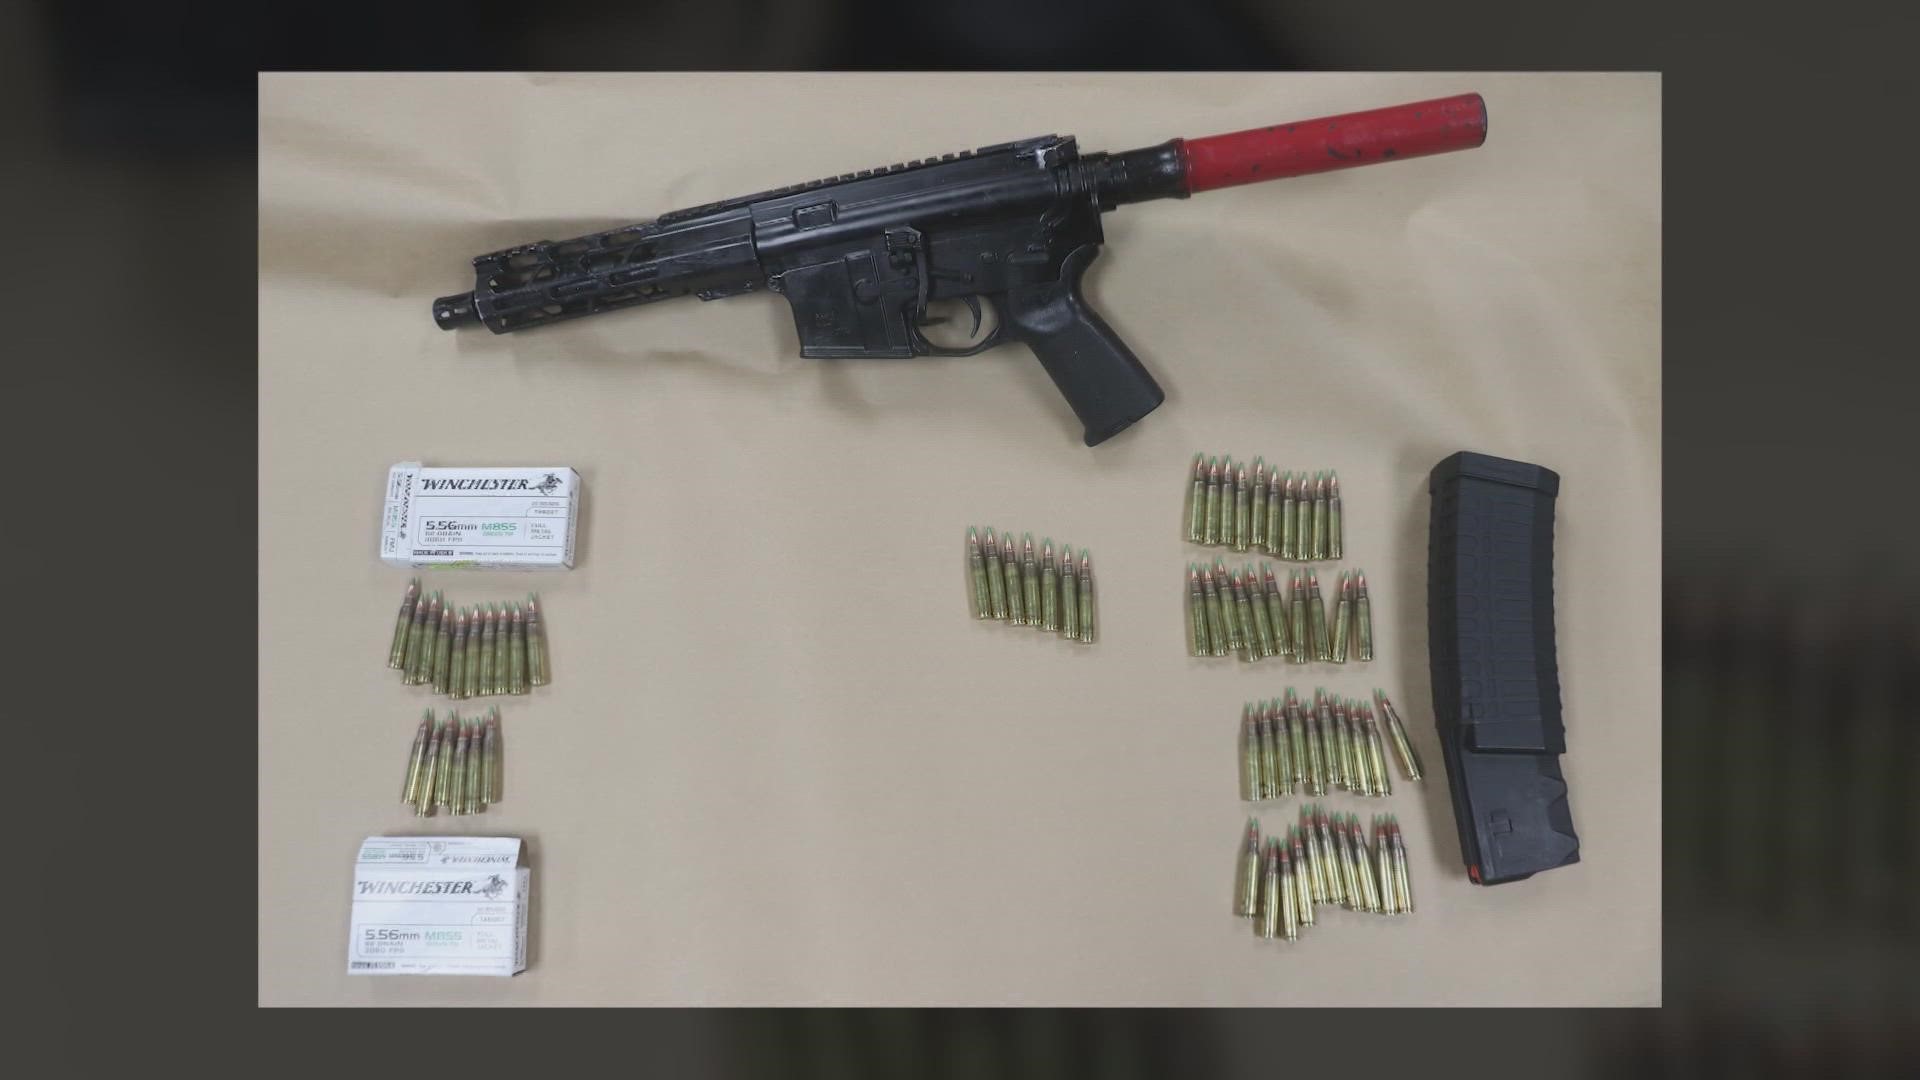 Authorities said they found a modified AR-15 pistol and a 60-round magazine. Dozens of armor-piercing rounds were also confiscated.